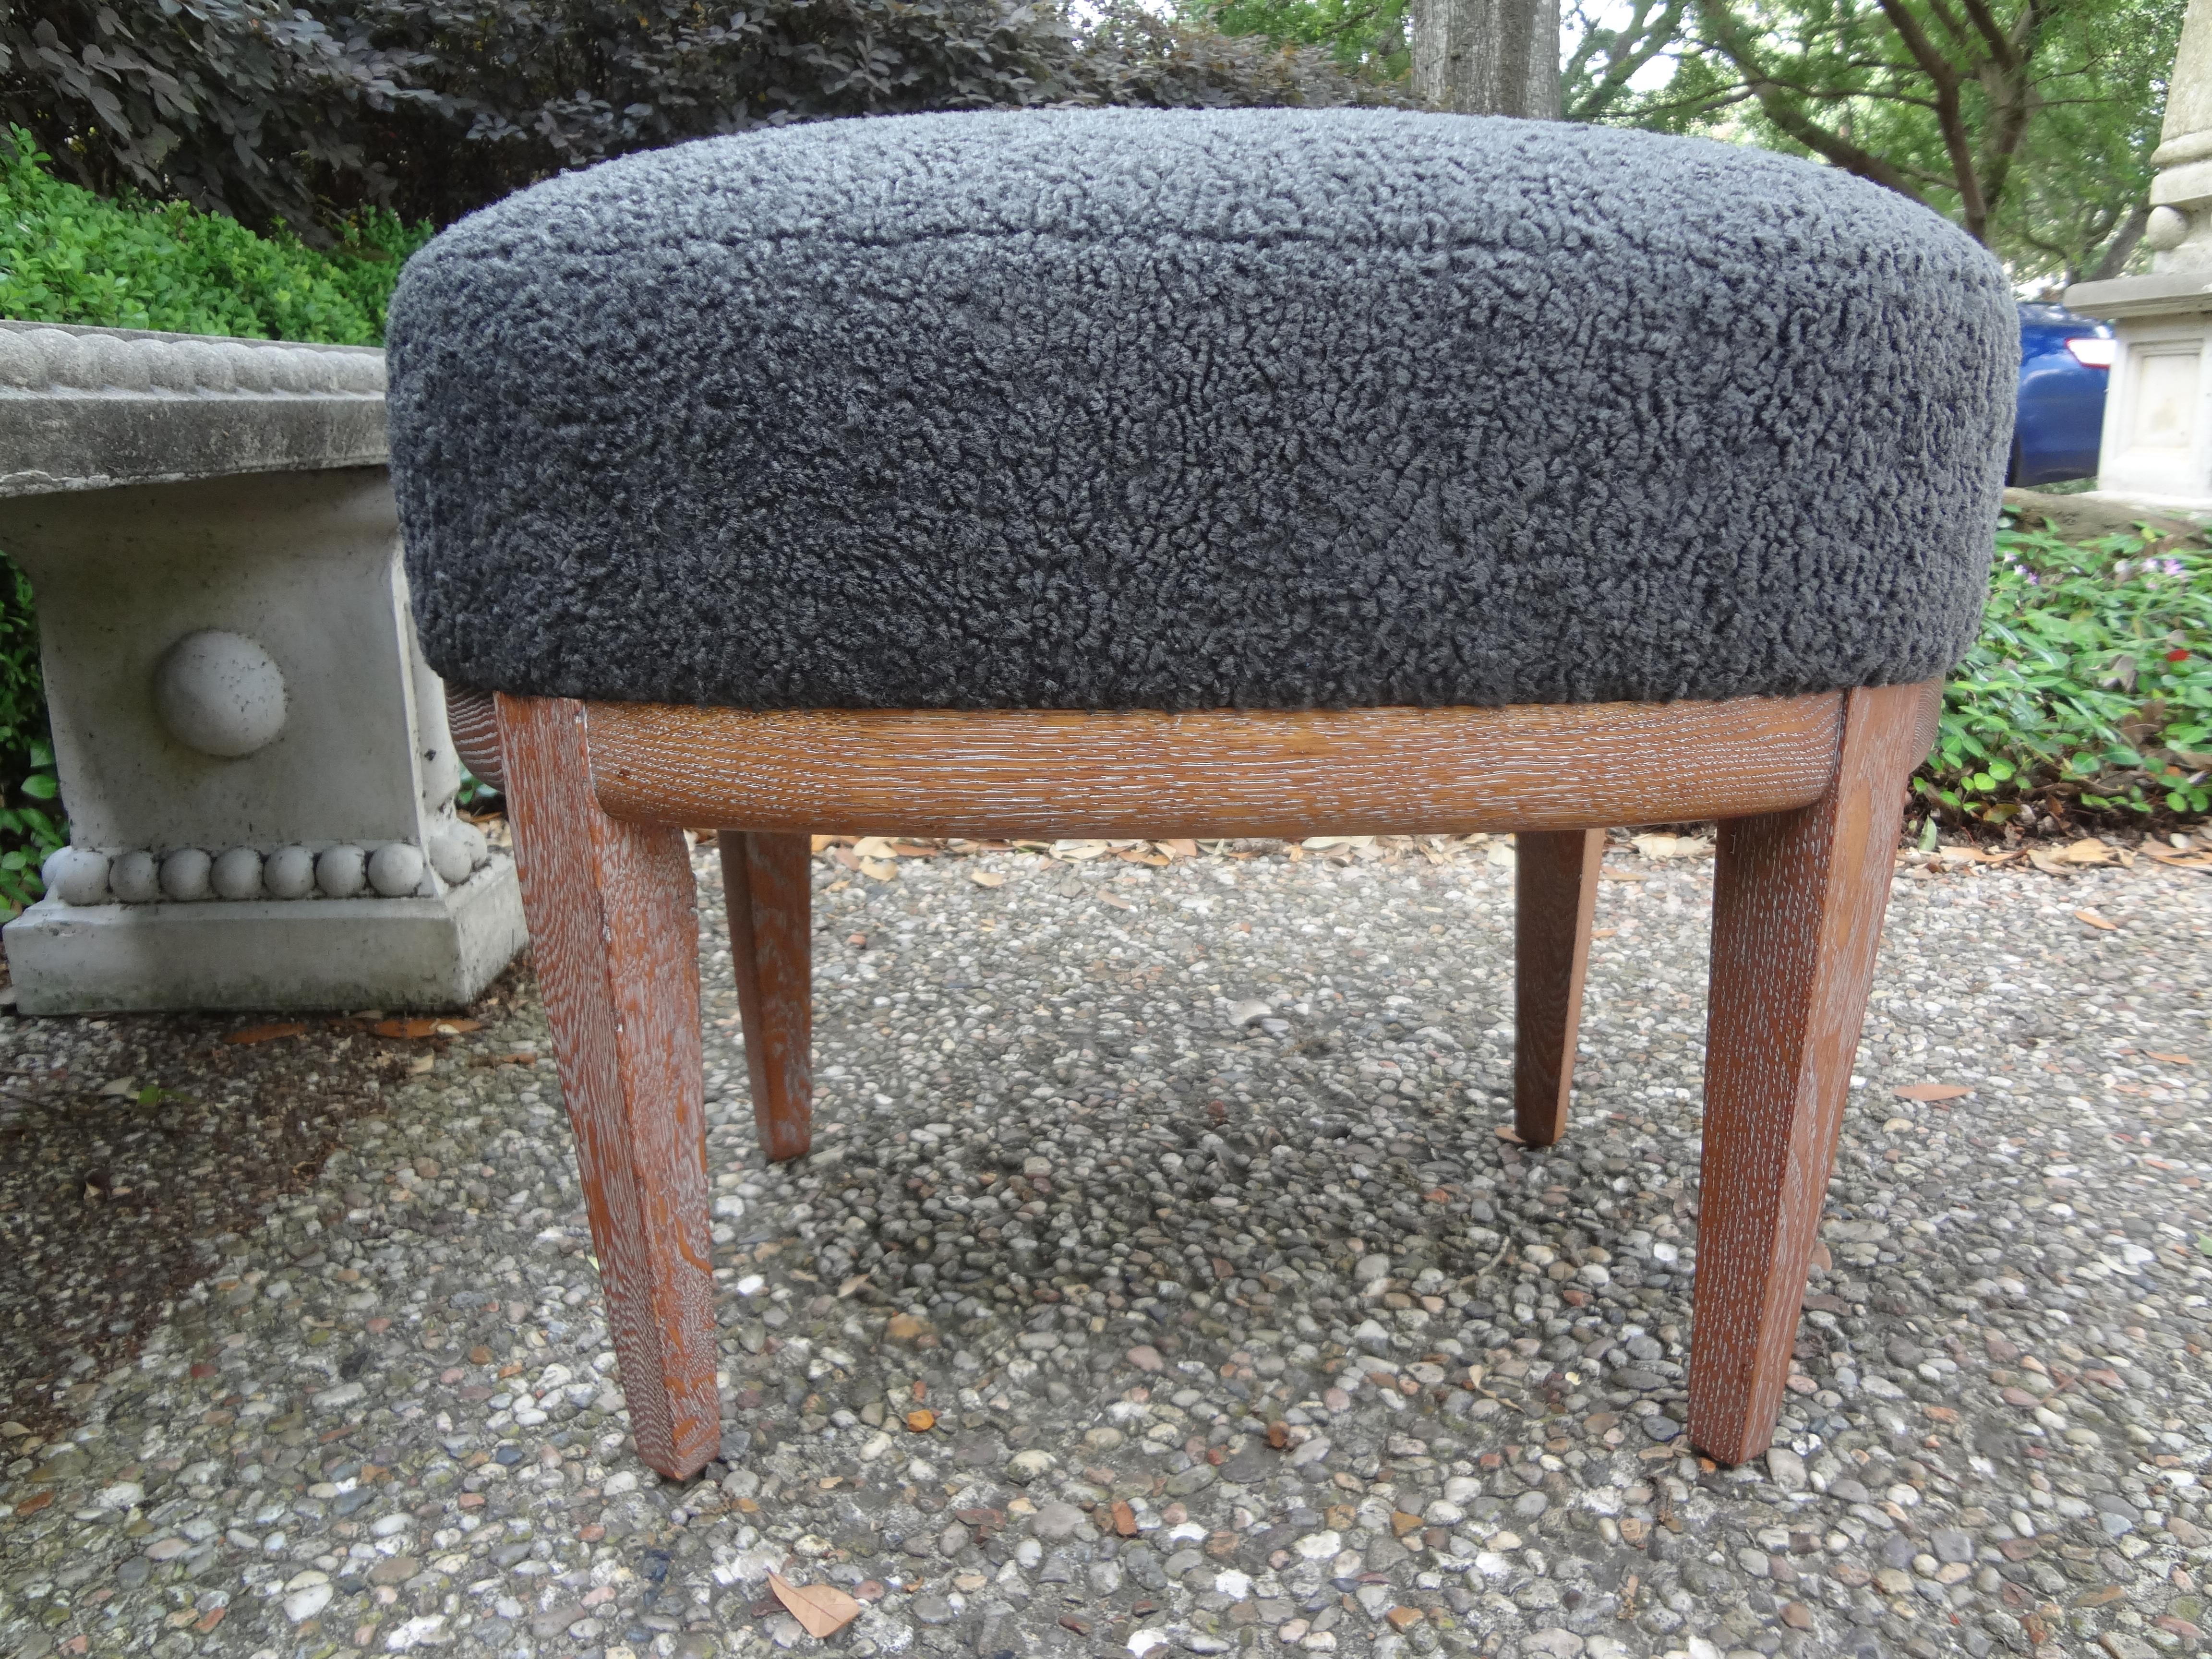 French Louis XVI style cerused oak bench or ottoman.
Handsome French 1940s cerused oak oval bench, ottoman or stool. This stylish French Louis XVI style limed oak ottoman has been newly upholstered in plush faux gray shearling. Our versatile and